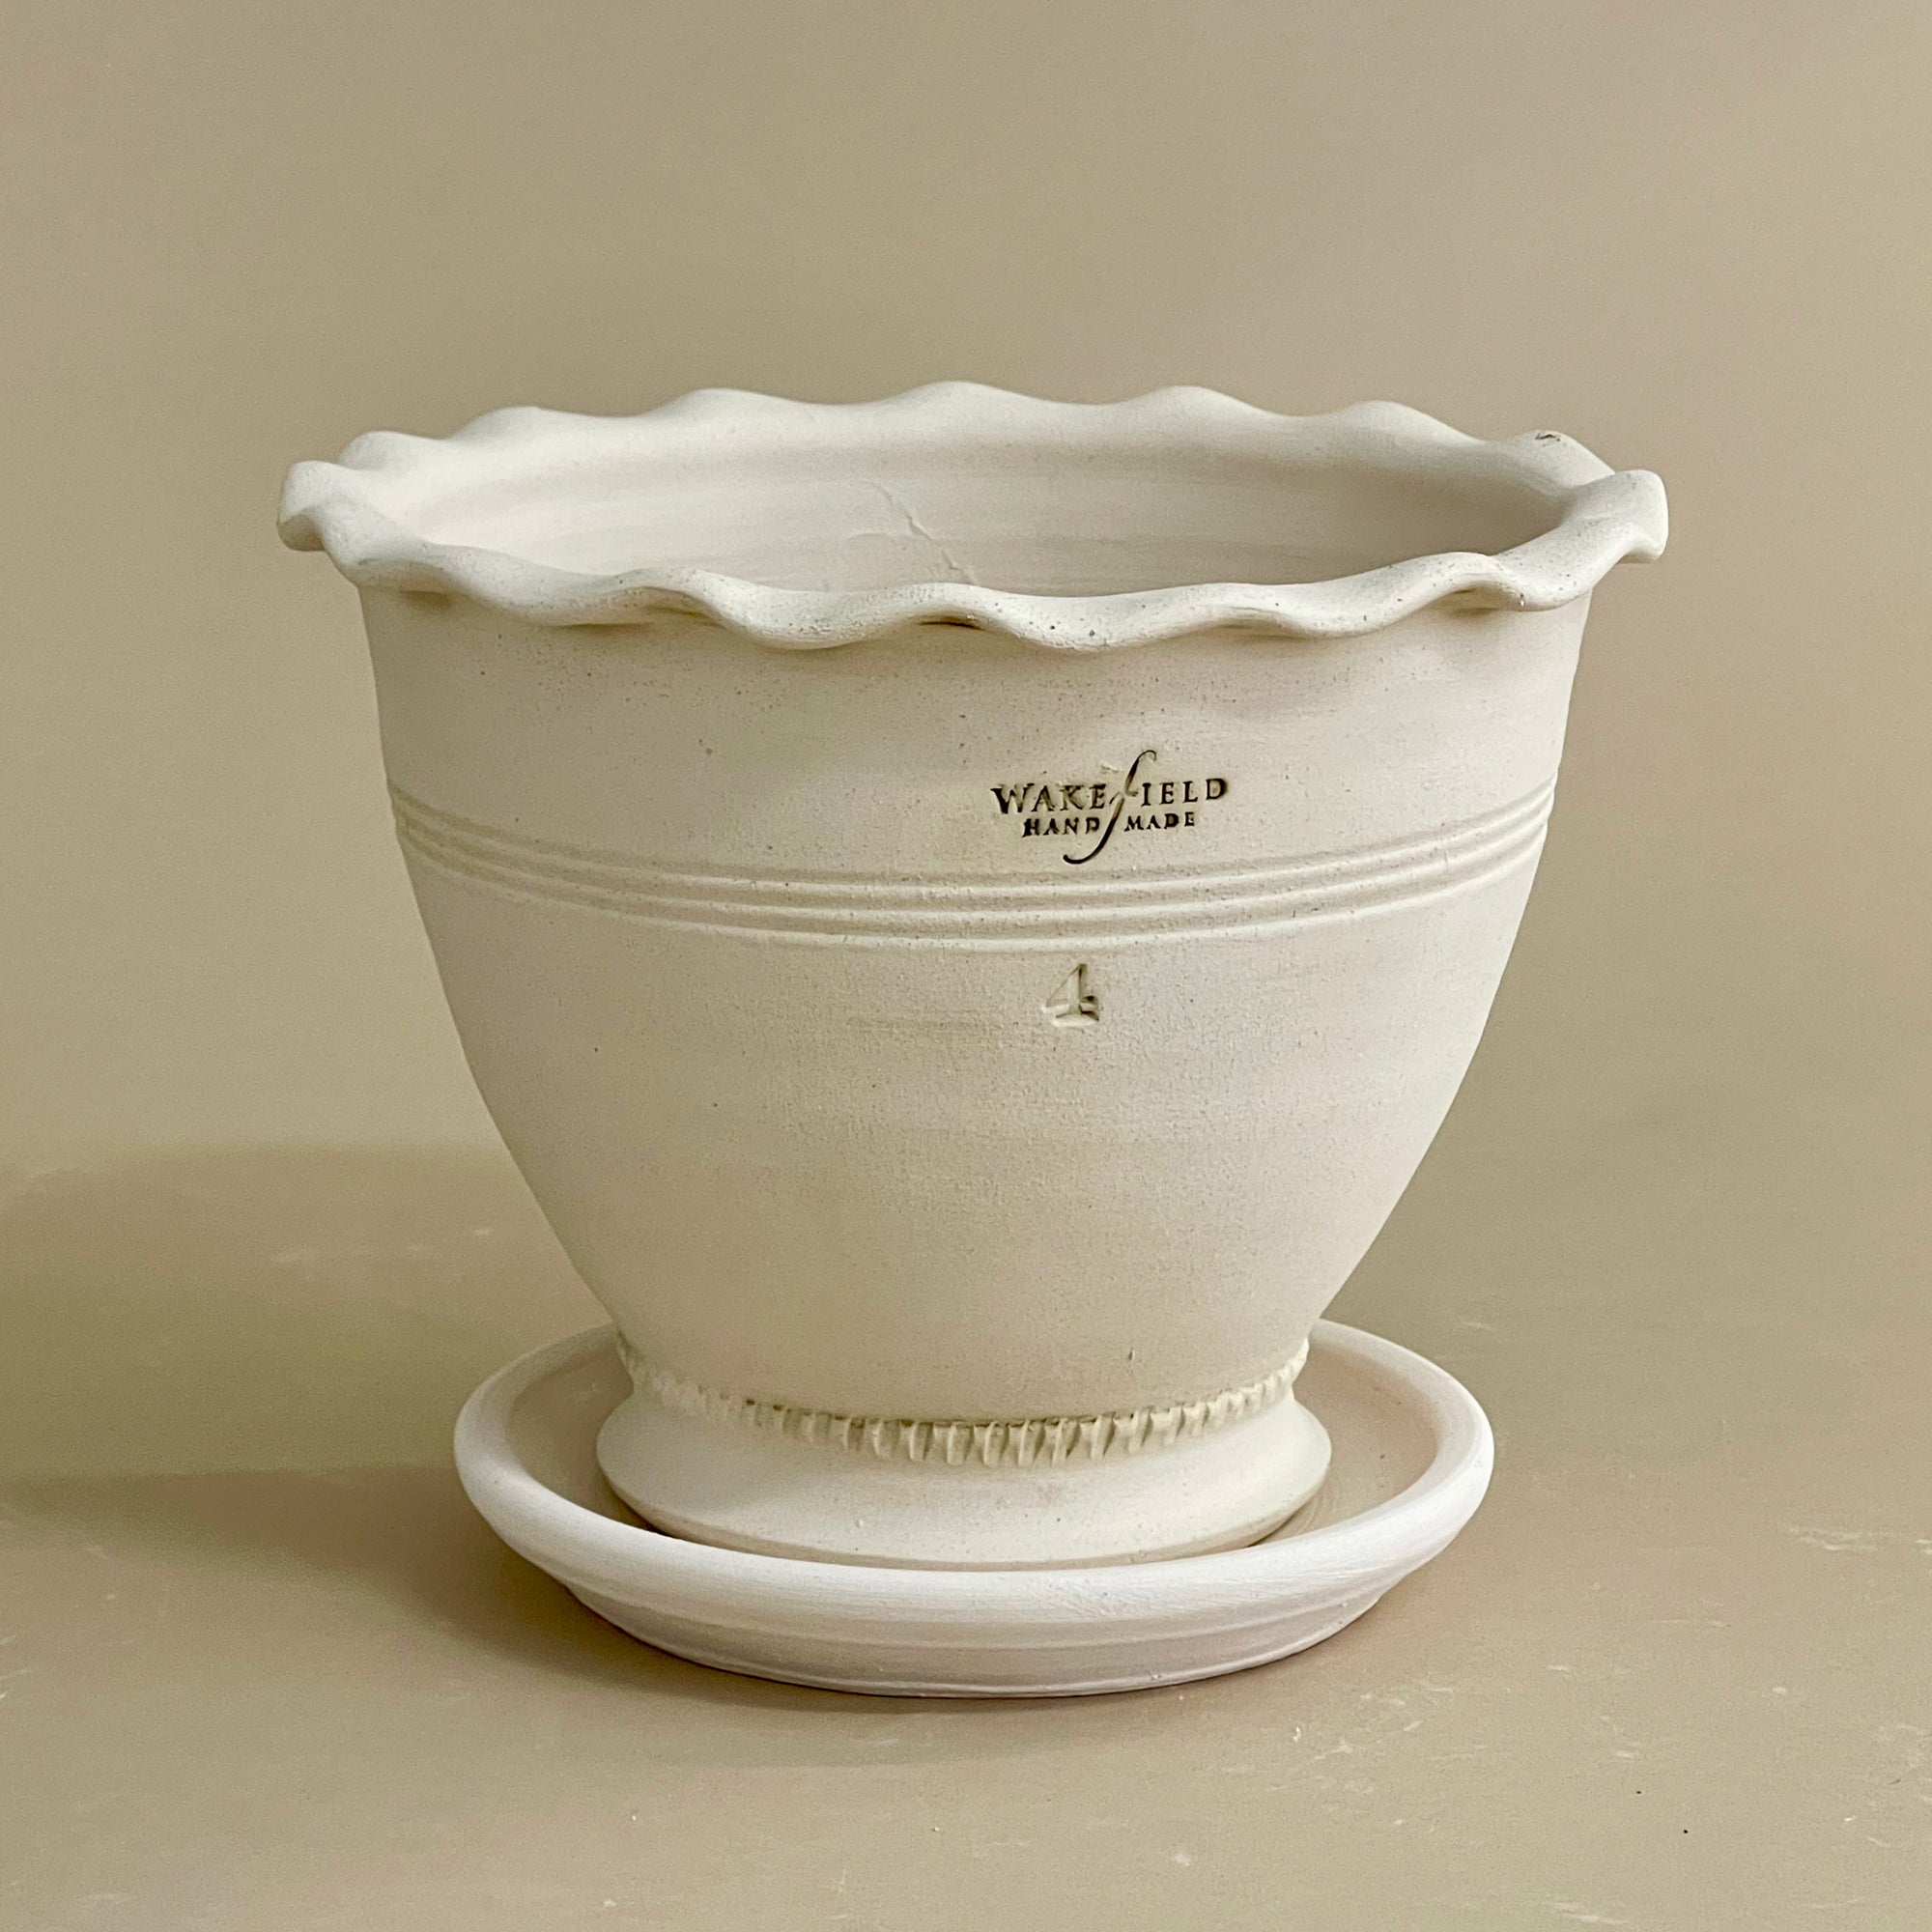 Klais Bowl with Ornamented Rim and Pedestal Foot, with Saucer